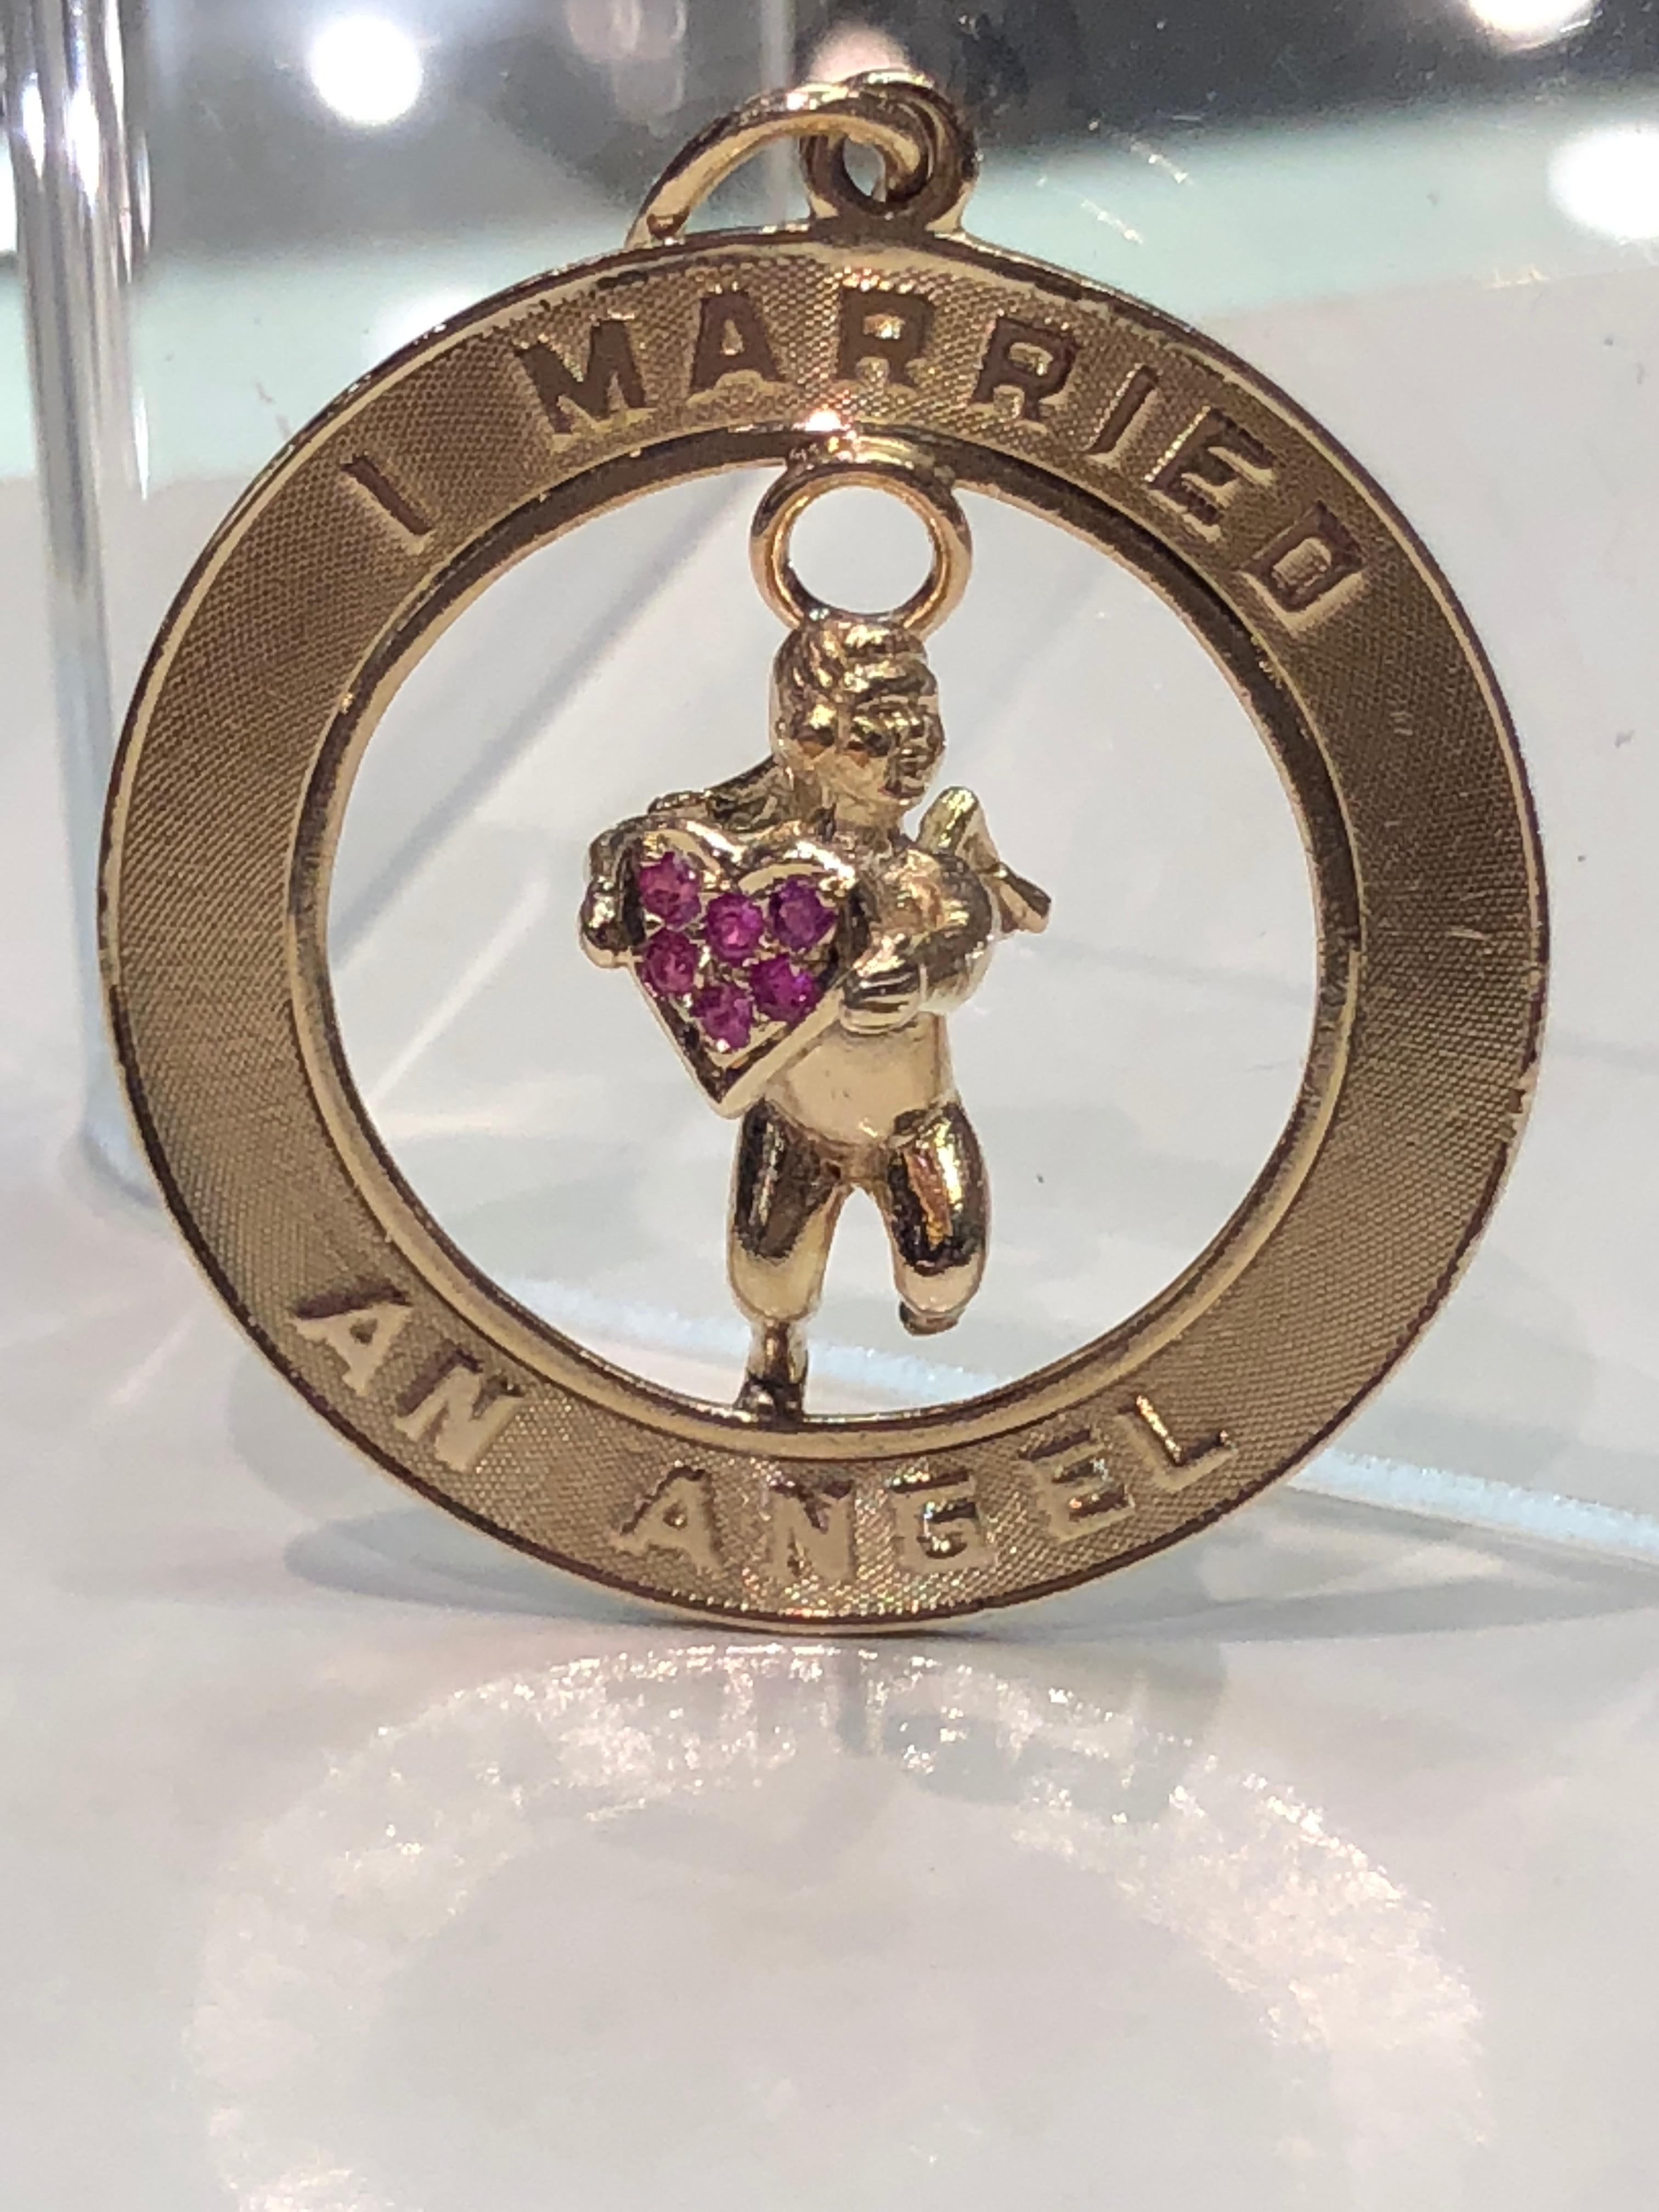 Large 14K gold pendant/charm. Figural cherub holding a ruby-encrusted heart.  Engraved around the border:  